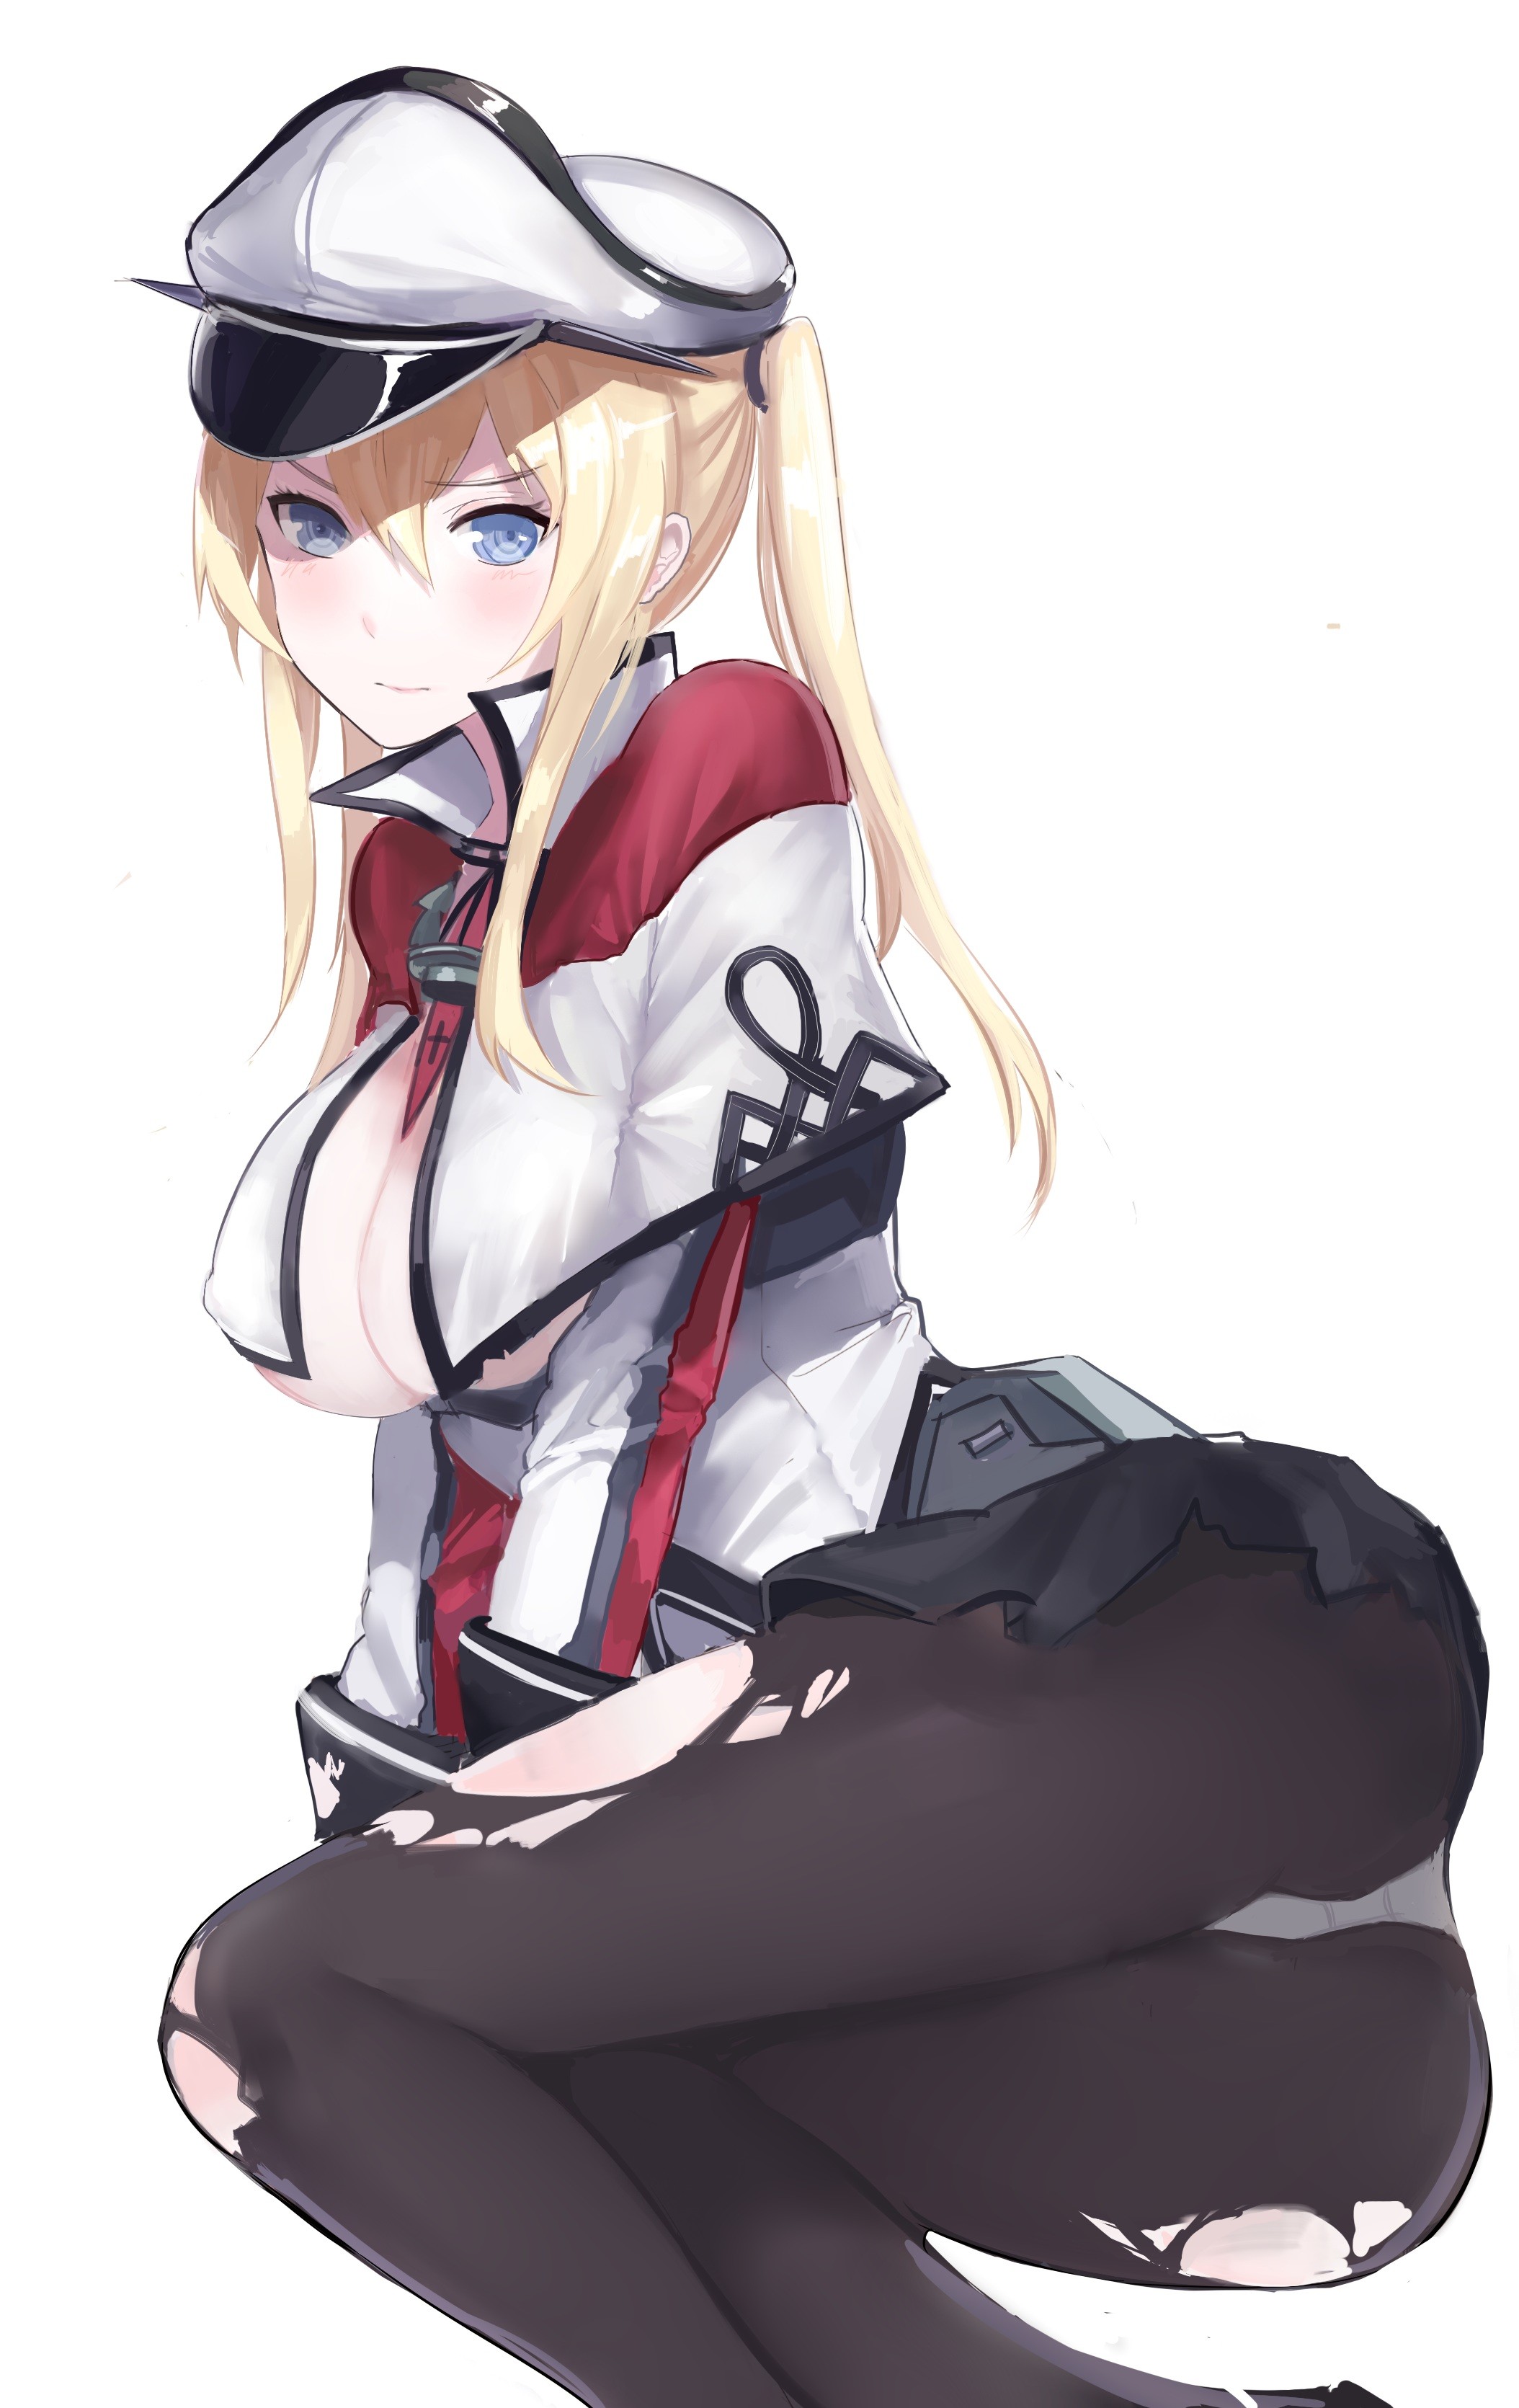 Anime 2108x3341 anime anime girls Kantai Collection Graf Zeppelin (KanColle) cleavage no bra torn clothes uniform long hair blonde blue eyes open shirt boobs big boobs hat women with hats Pixiv curvy pantyhose torn pantyhose black pantyhose white background ass